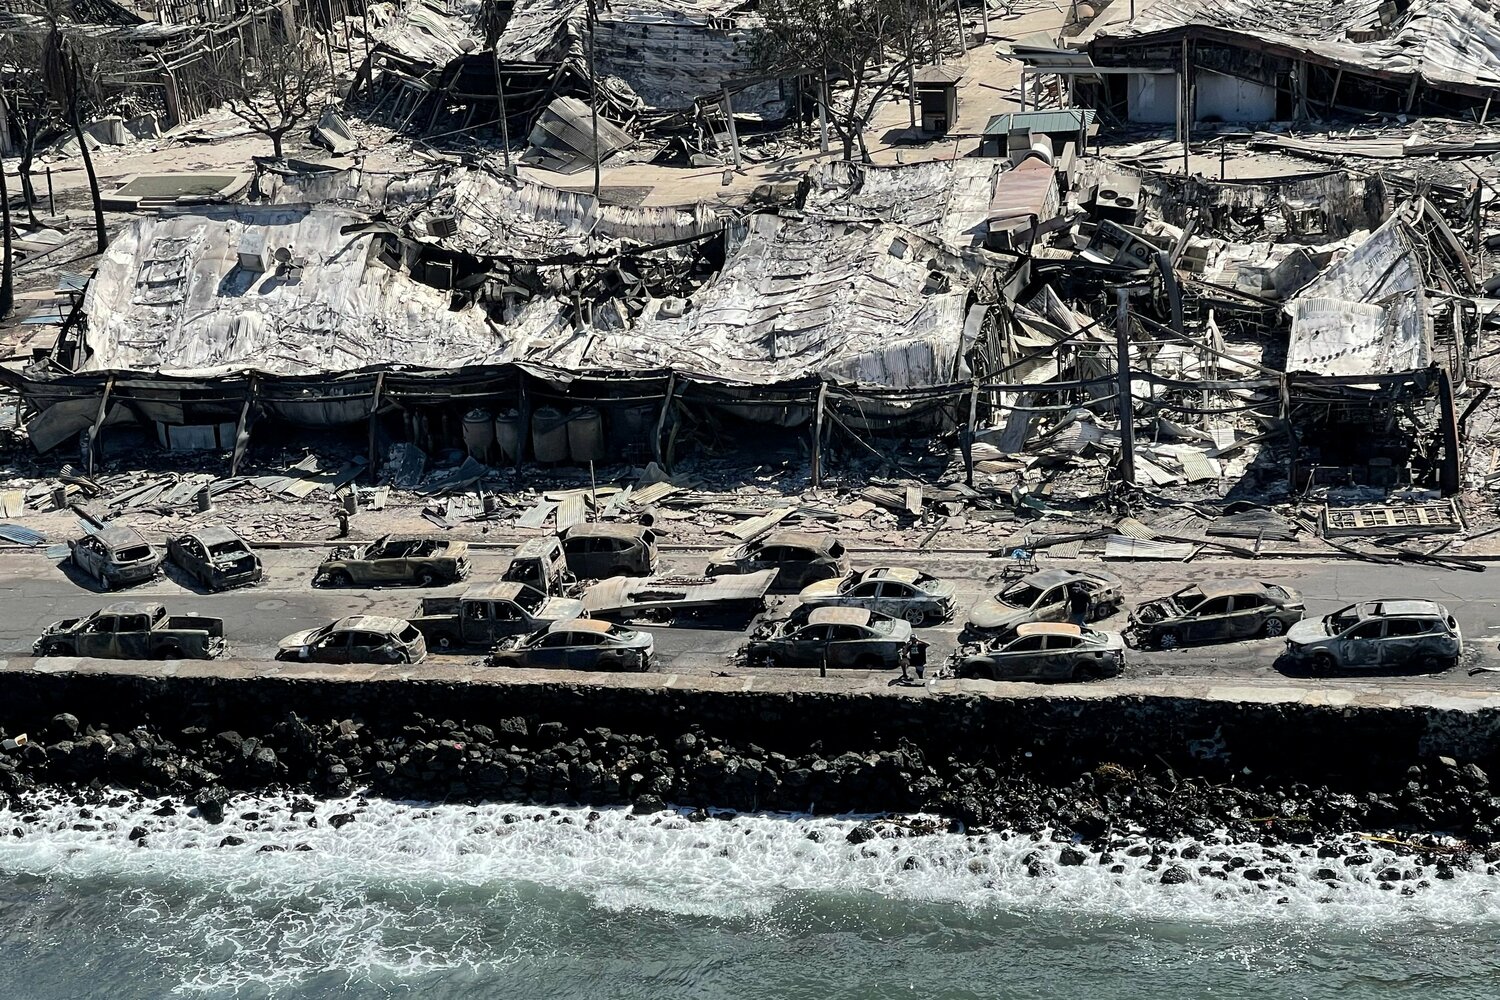 The shells of burned houses and buildings are left after wildfires driven by high winds burned across most of the town in Lahaina, Hawaii, Aug. 11, 2023. Lahaina’s Maria Lanakila Catholic Church was spared from the flames that wiped out most of the surrounding community.